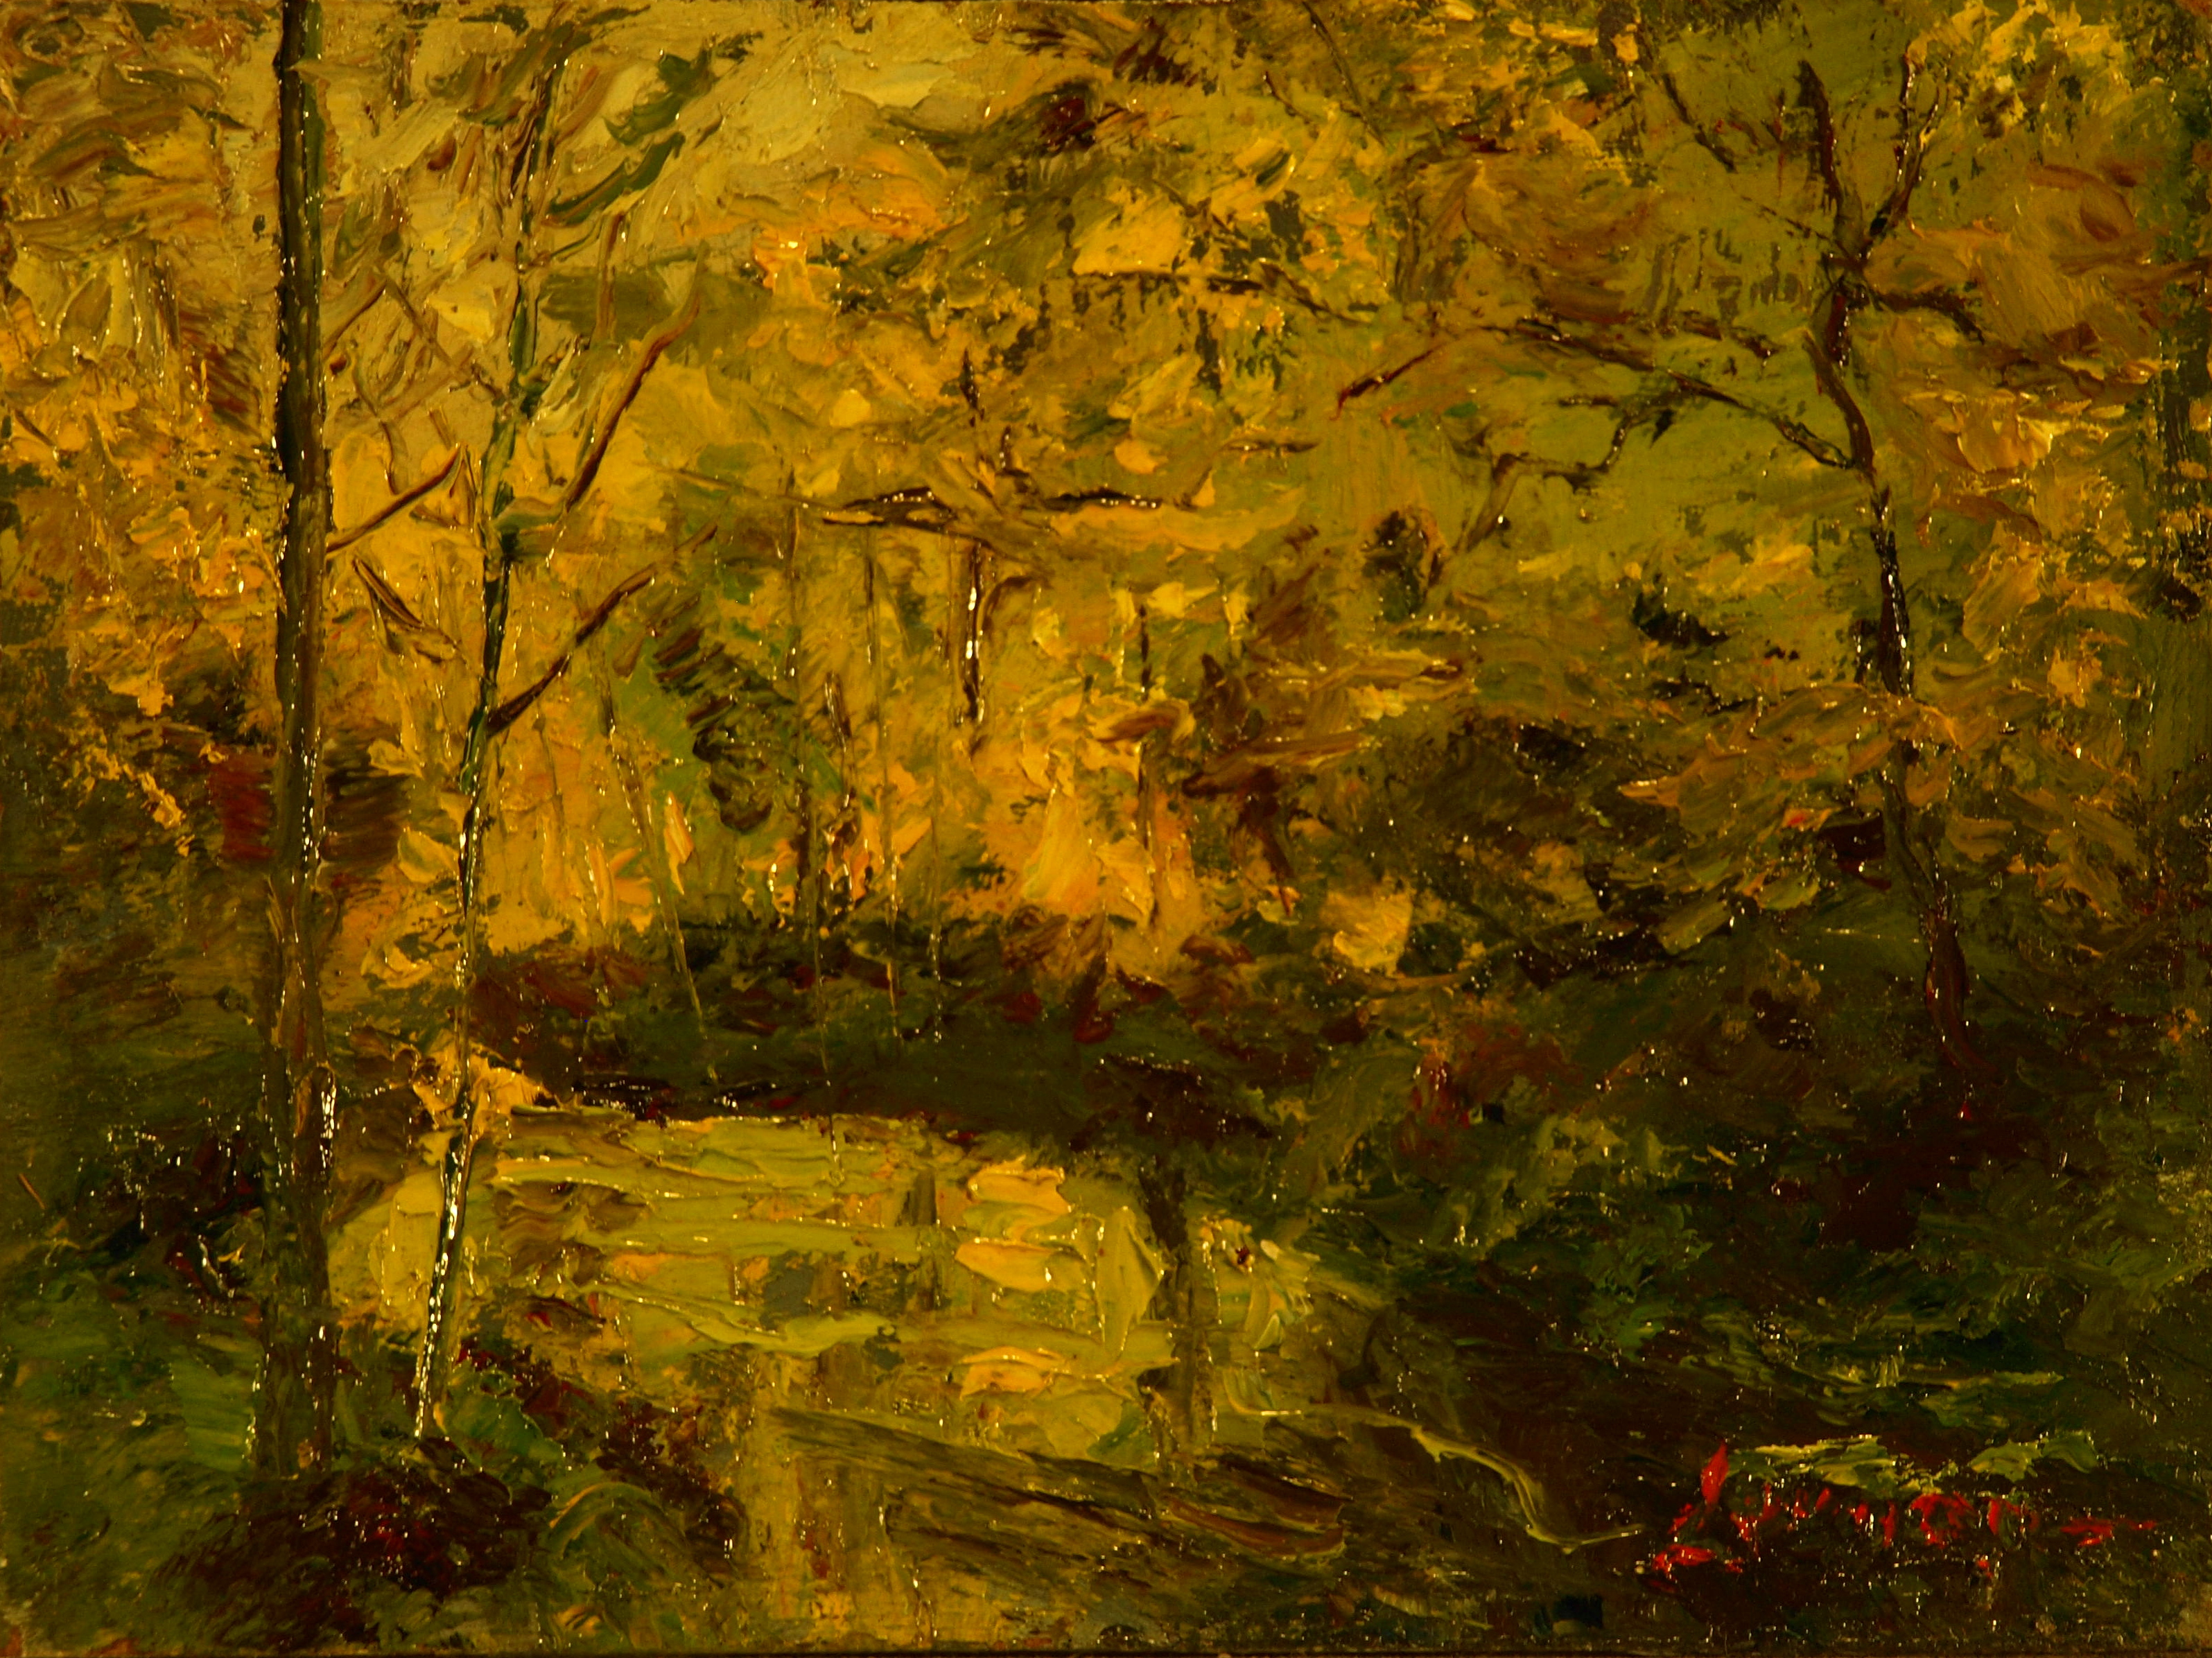 Spring by the Brook, Oil on Panel, 6 x 8 Inches, by Bernard Lennon, $175